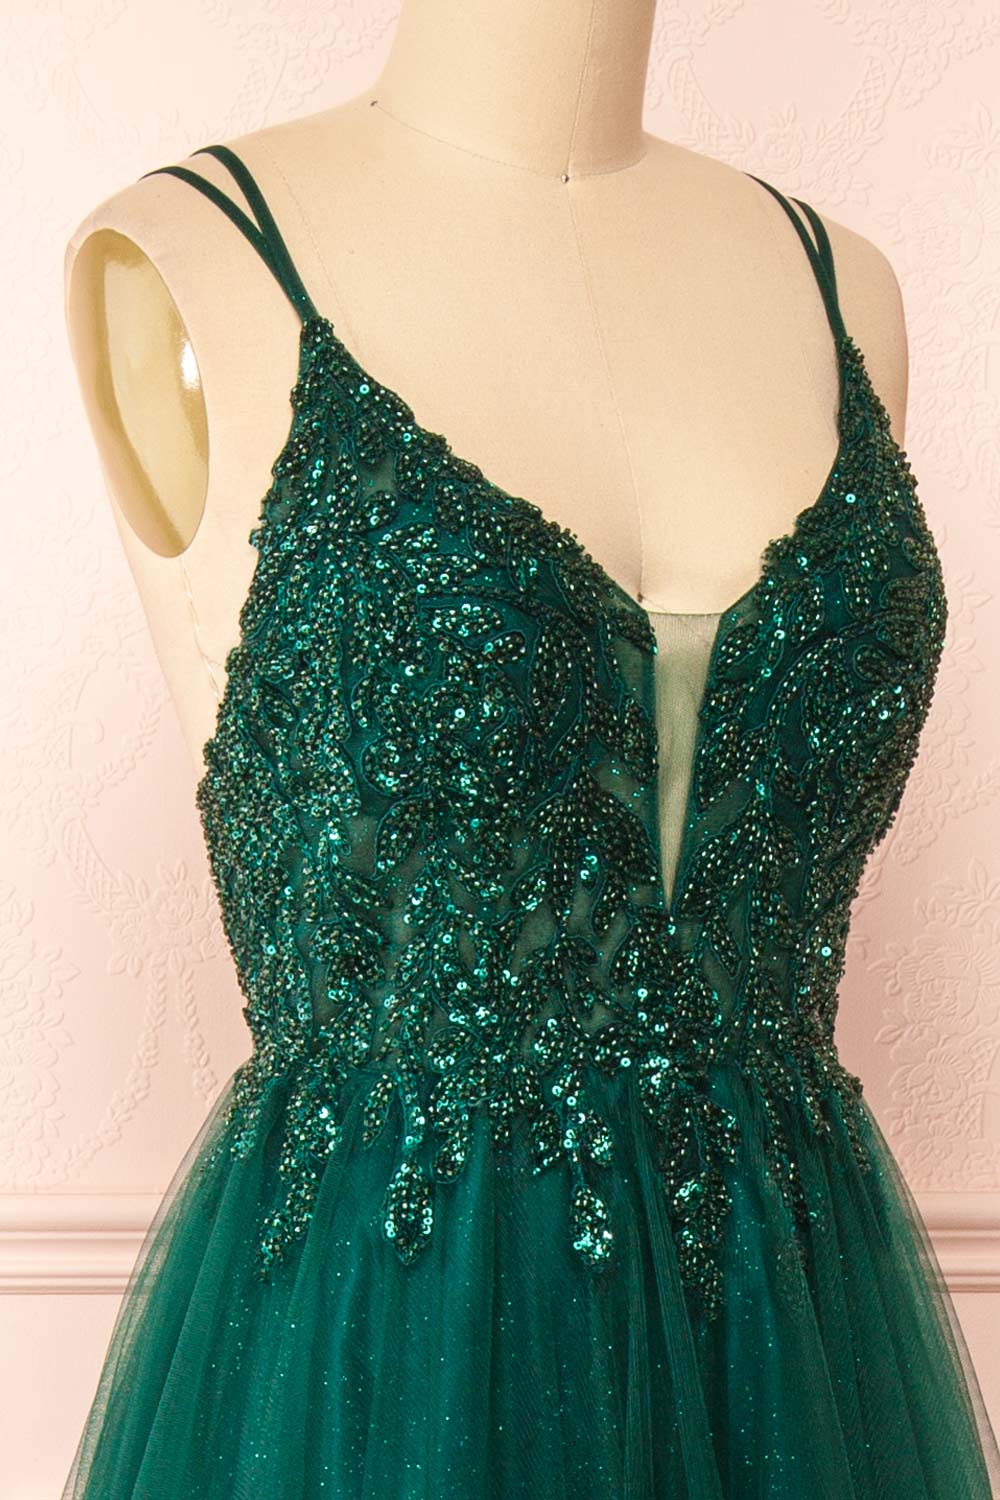 Aethera Green Sparkling Beaded A-Line Maxi Dress | Boutique 1861 side 